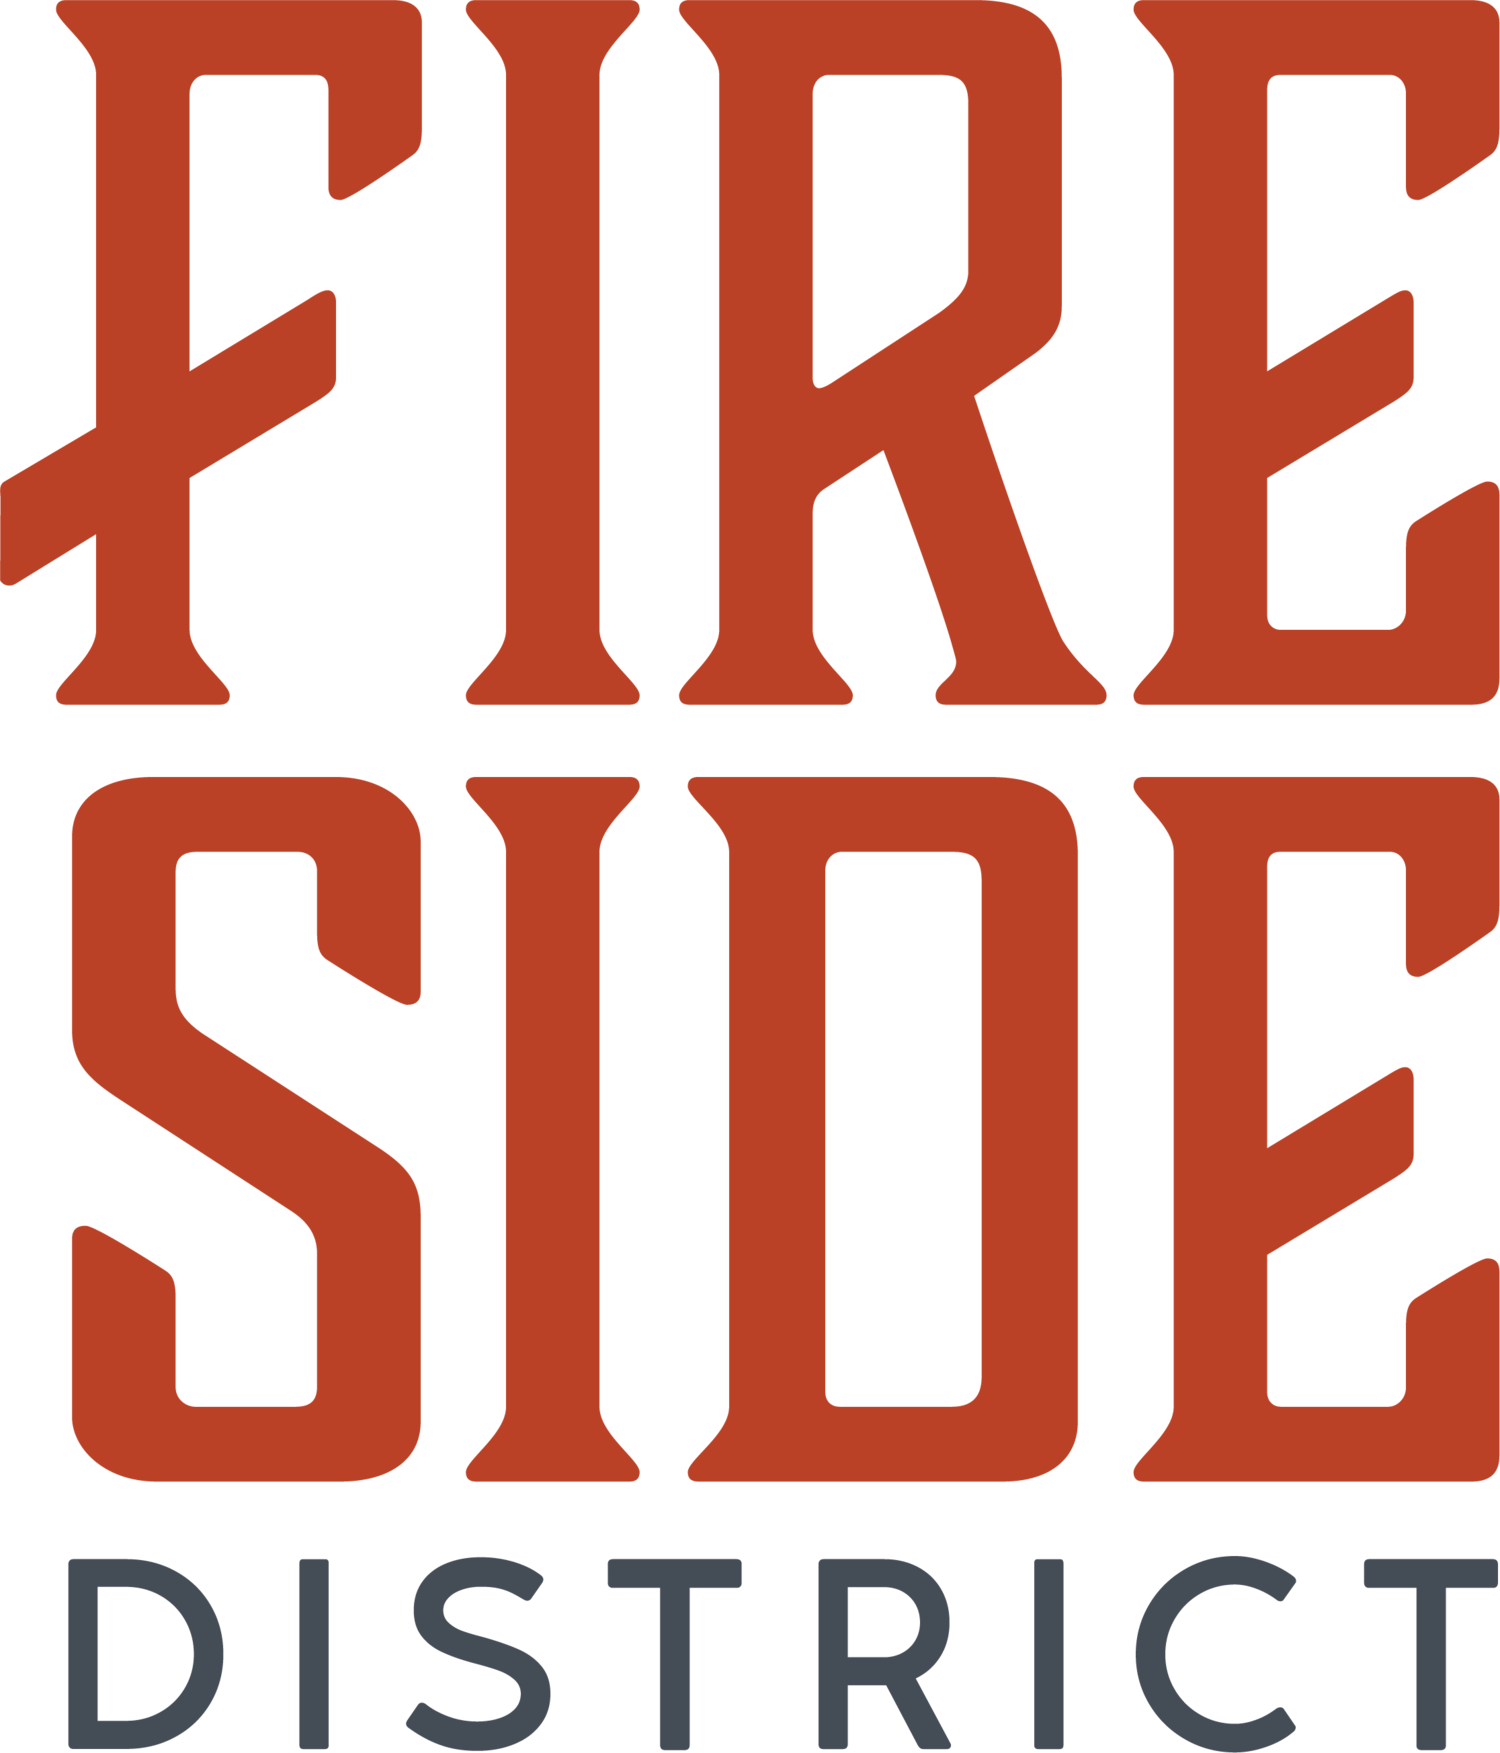 Fireside District  |  A Student Community in Stephenville, TX